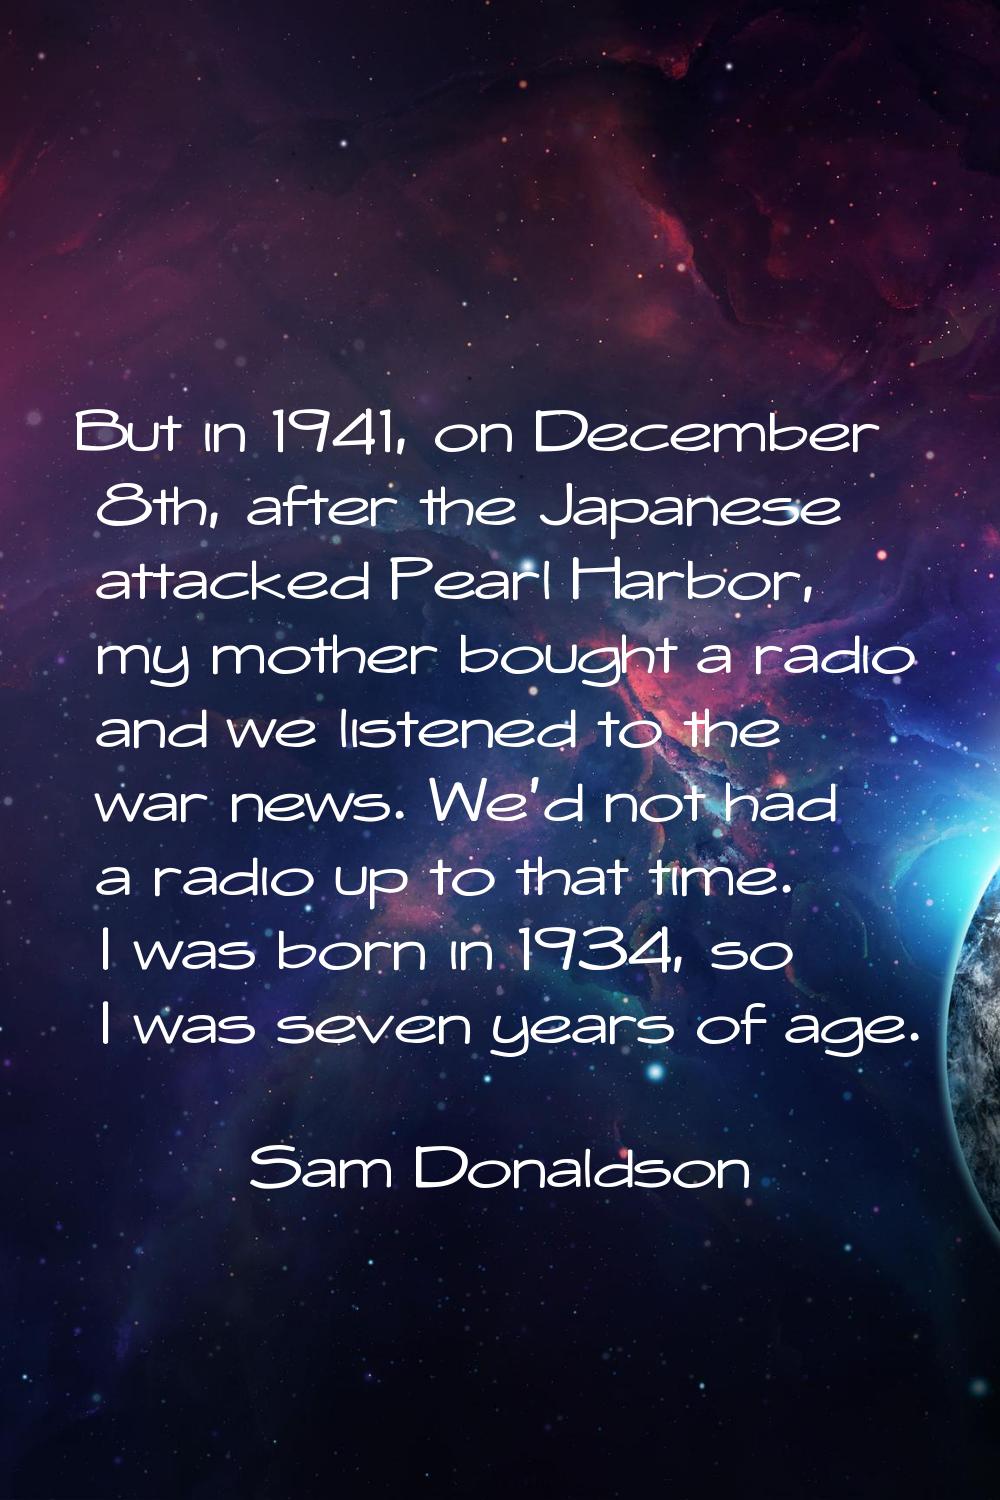 But in 1941, on December 8th, after the Japanese attacked Pearl Harbor, my mother bought a radio an